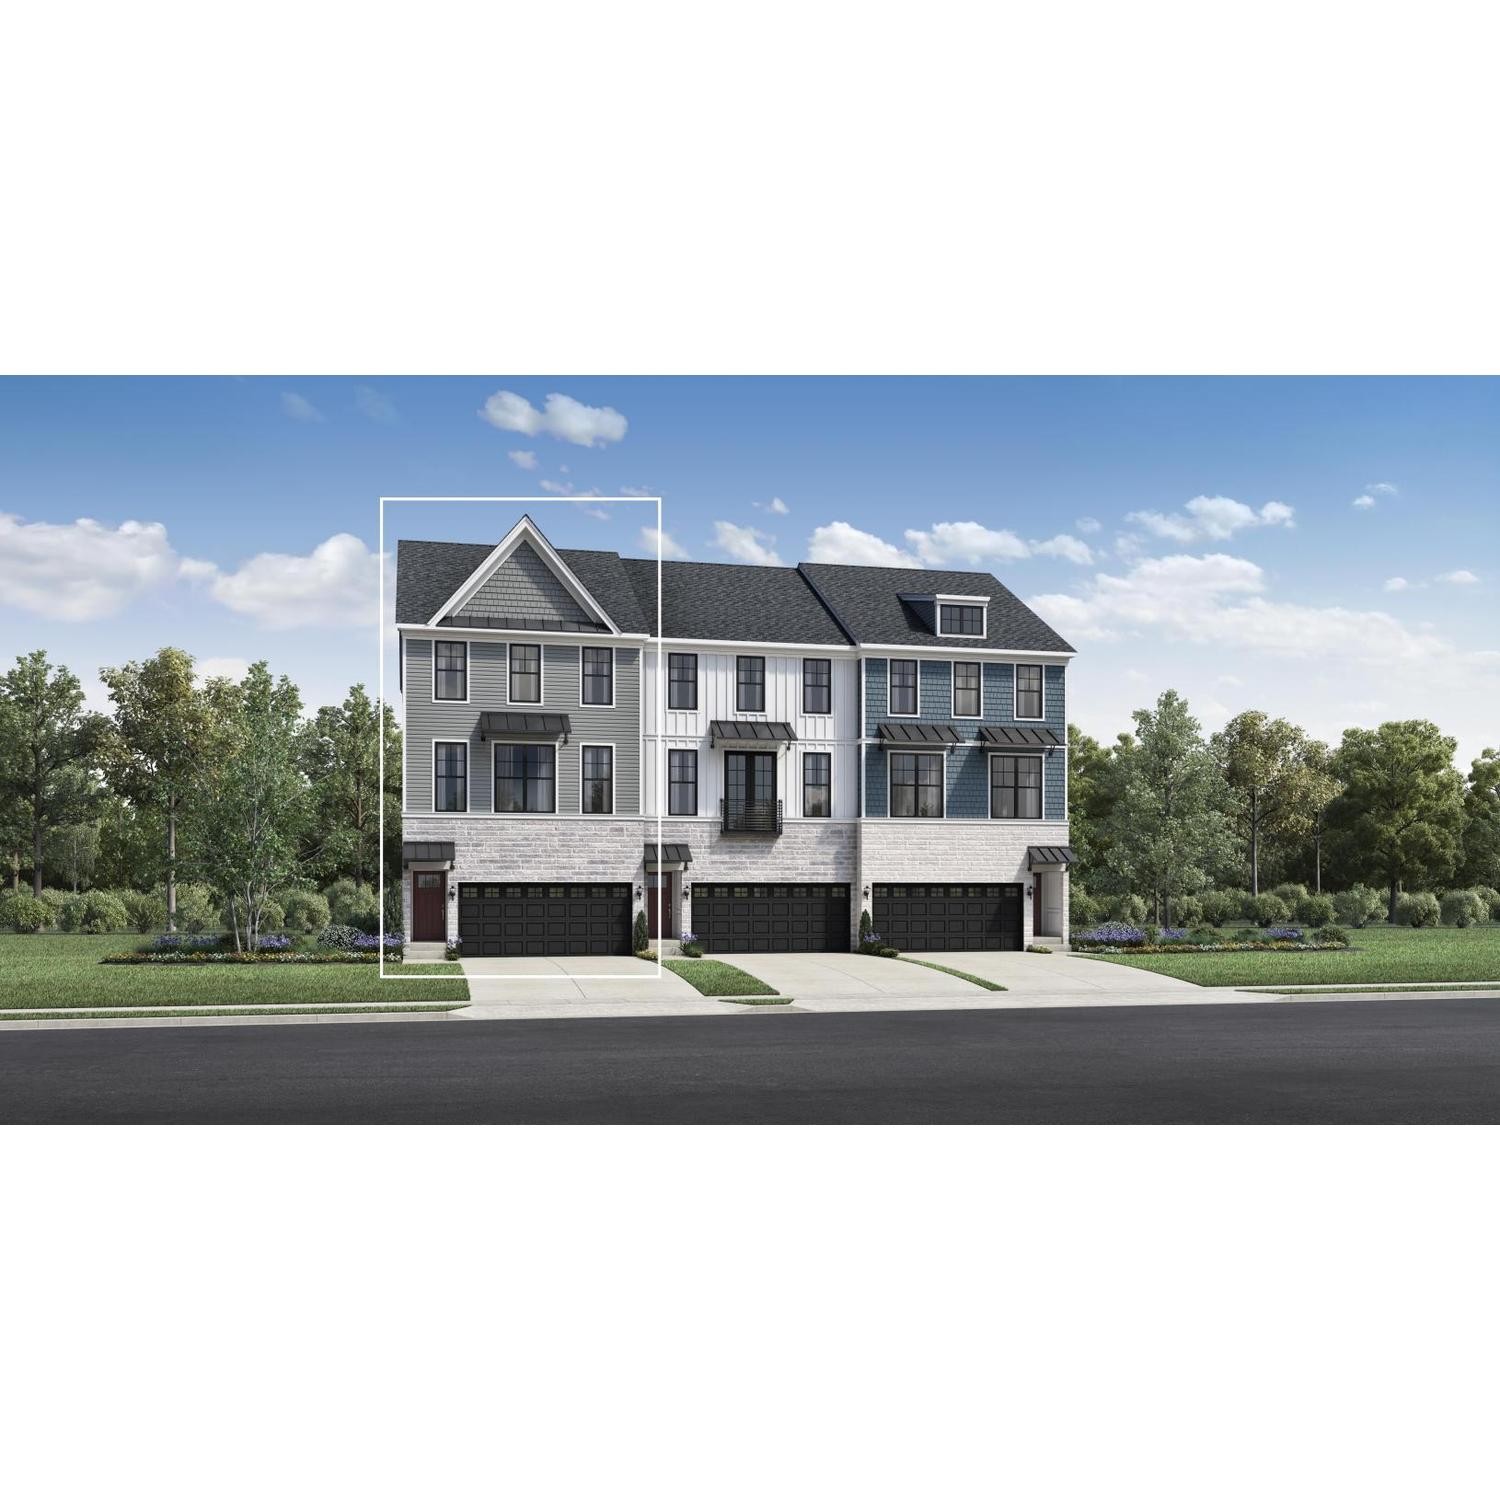 8. North Oaks Of Ann Arbor - The Townhome Collection